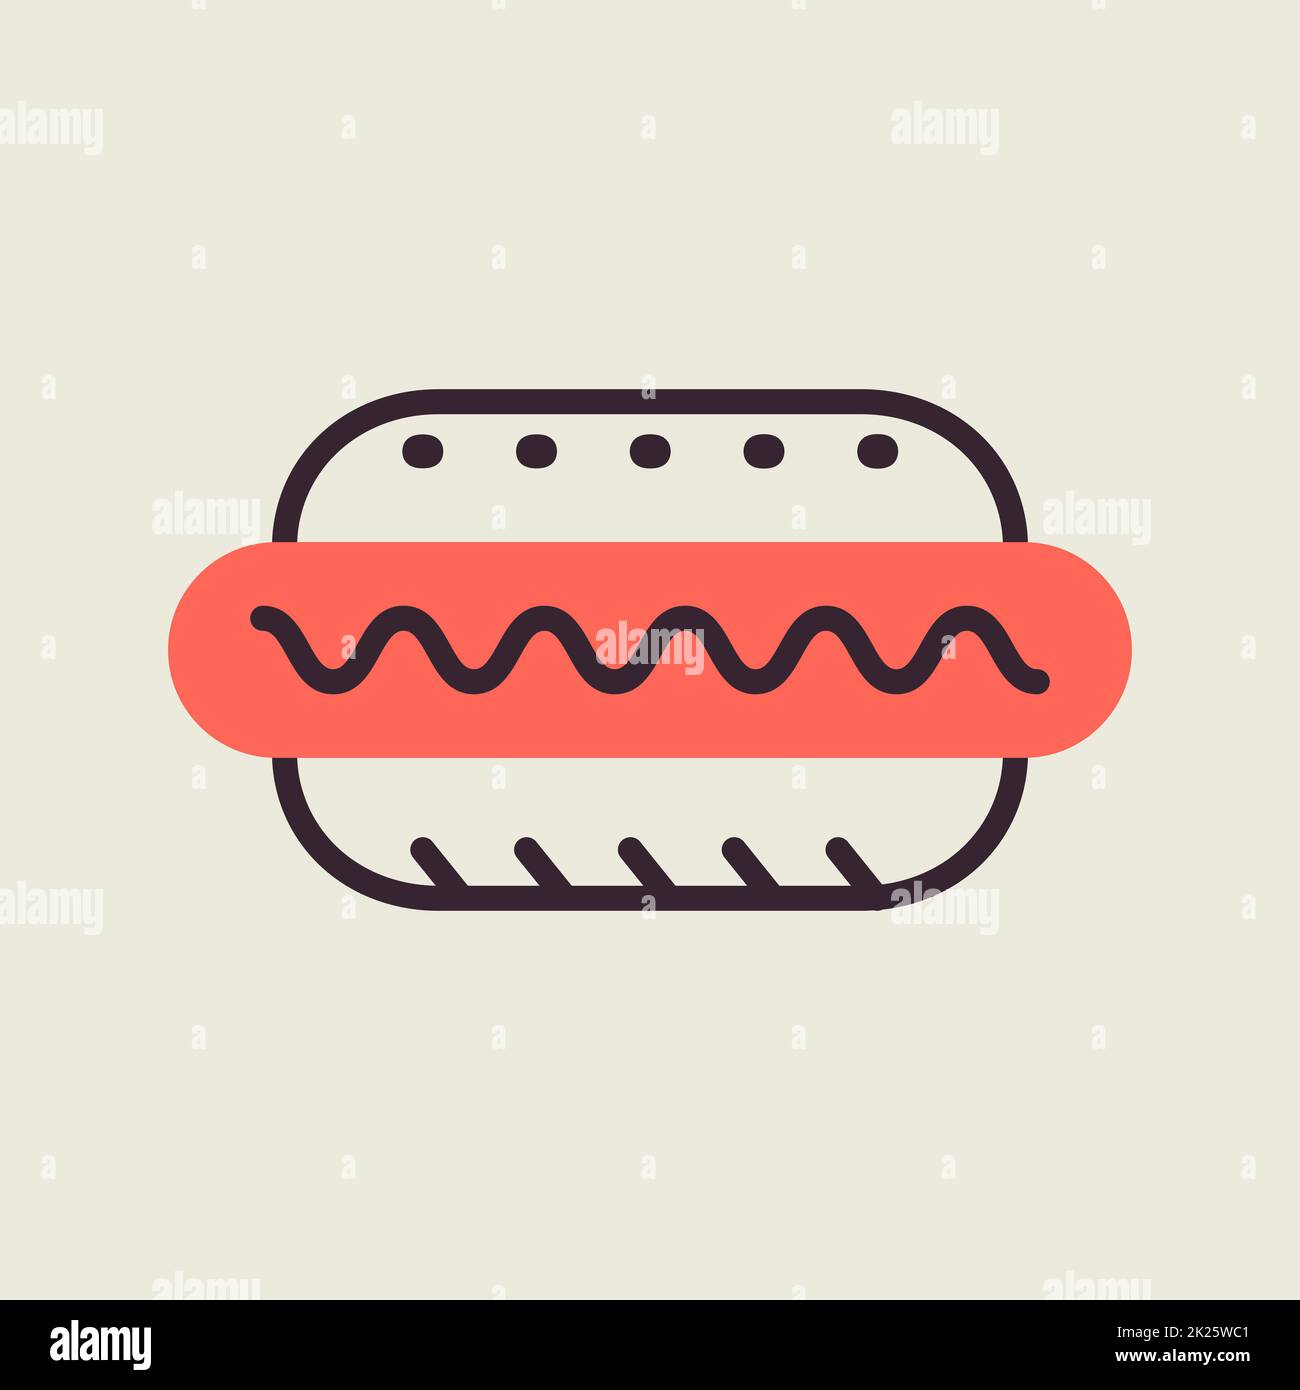 Hot dog vector icon. Fast food sign Stock Photo